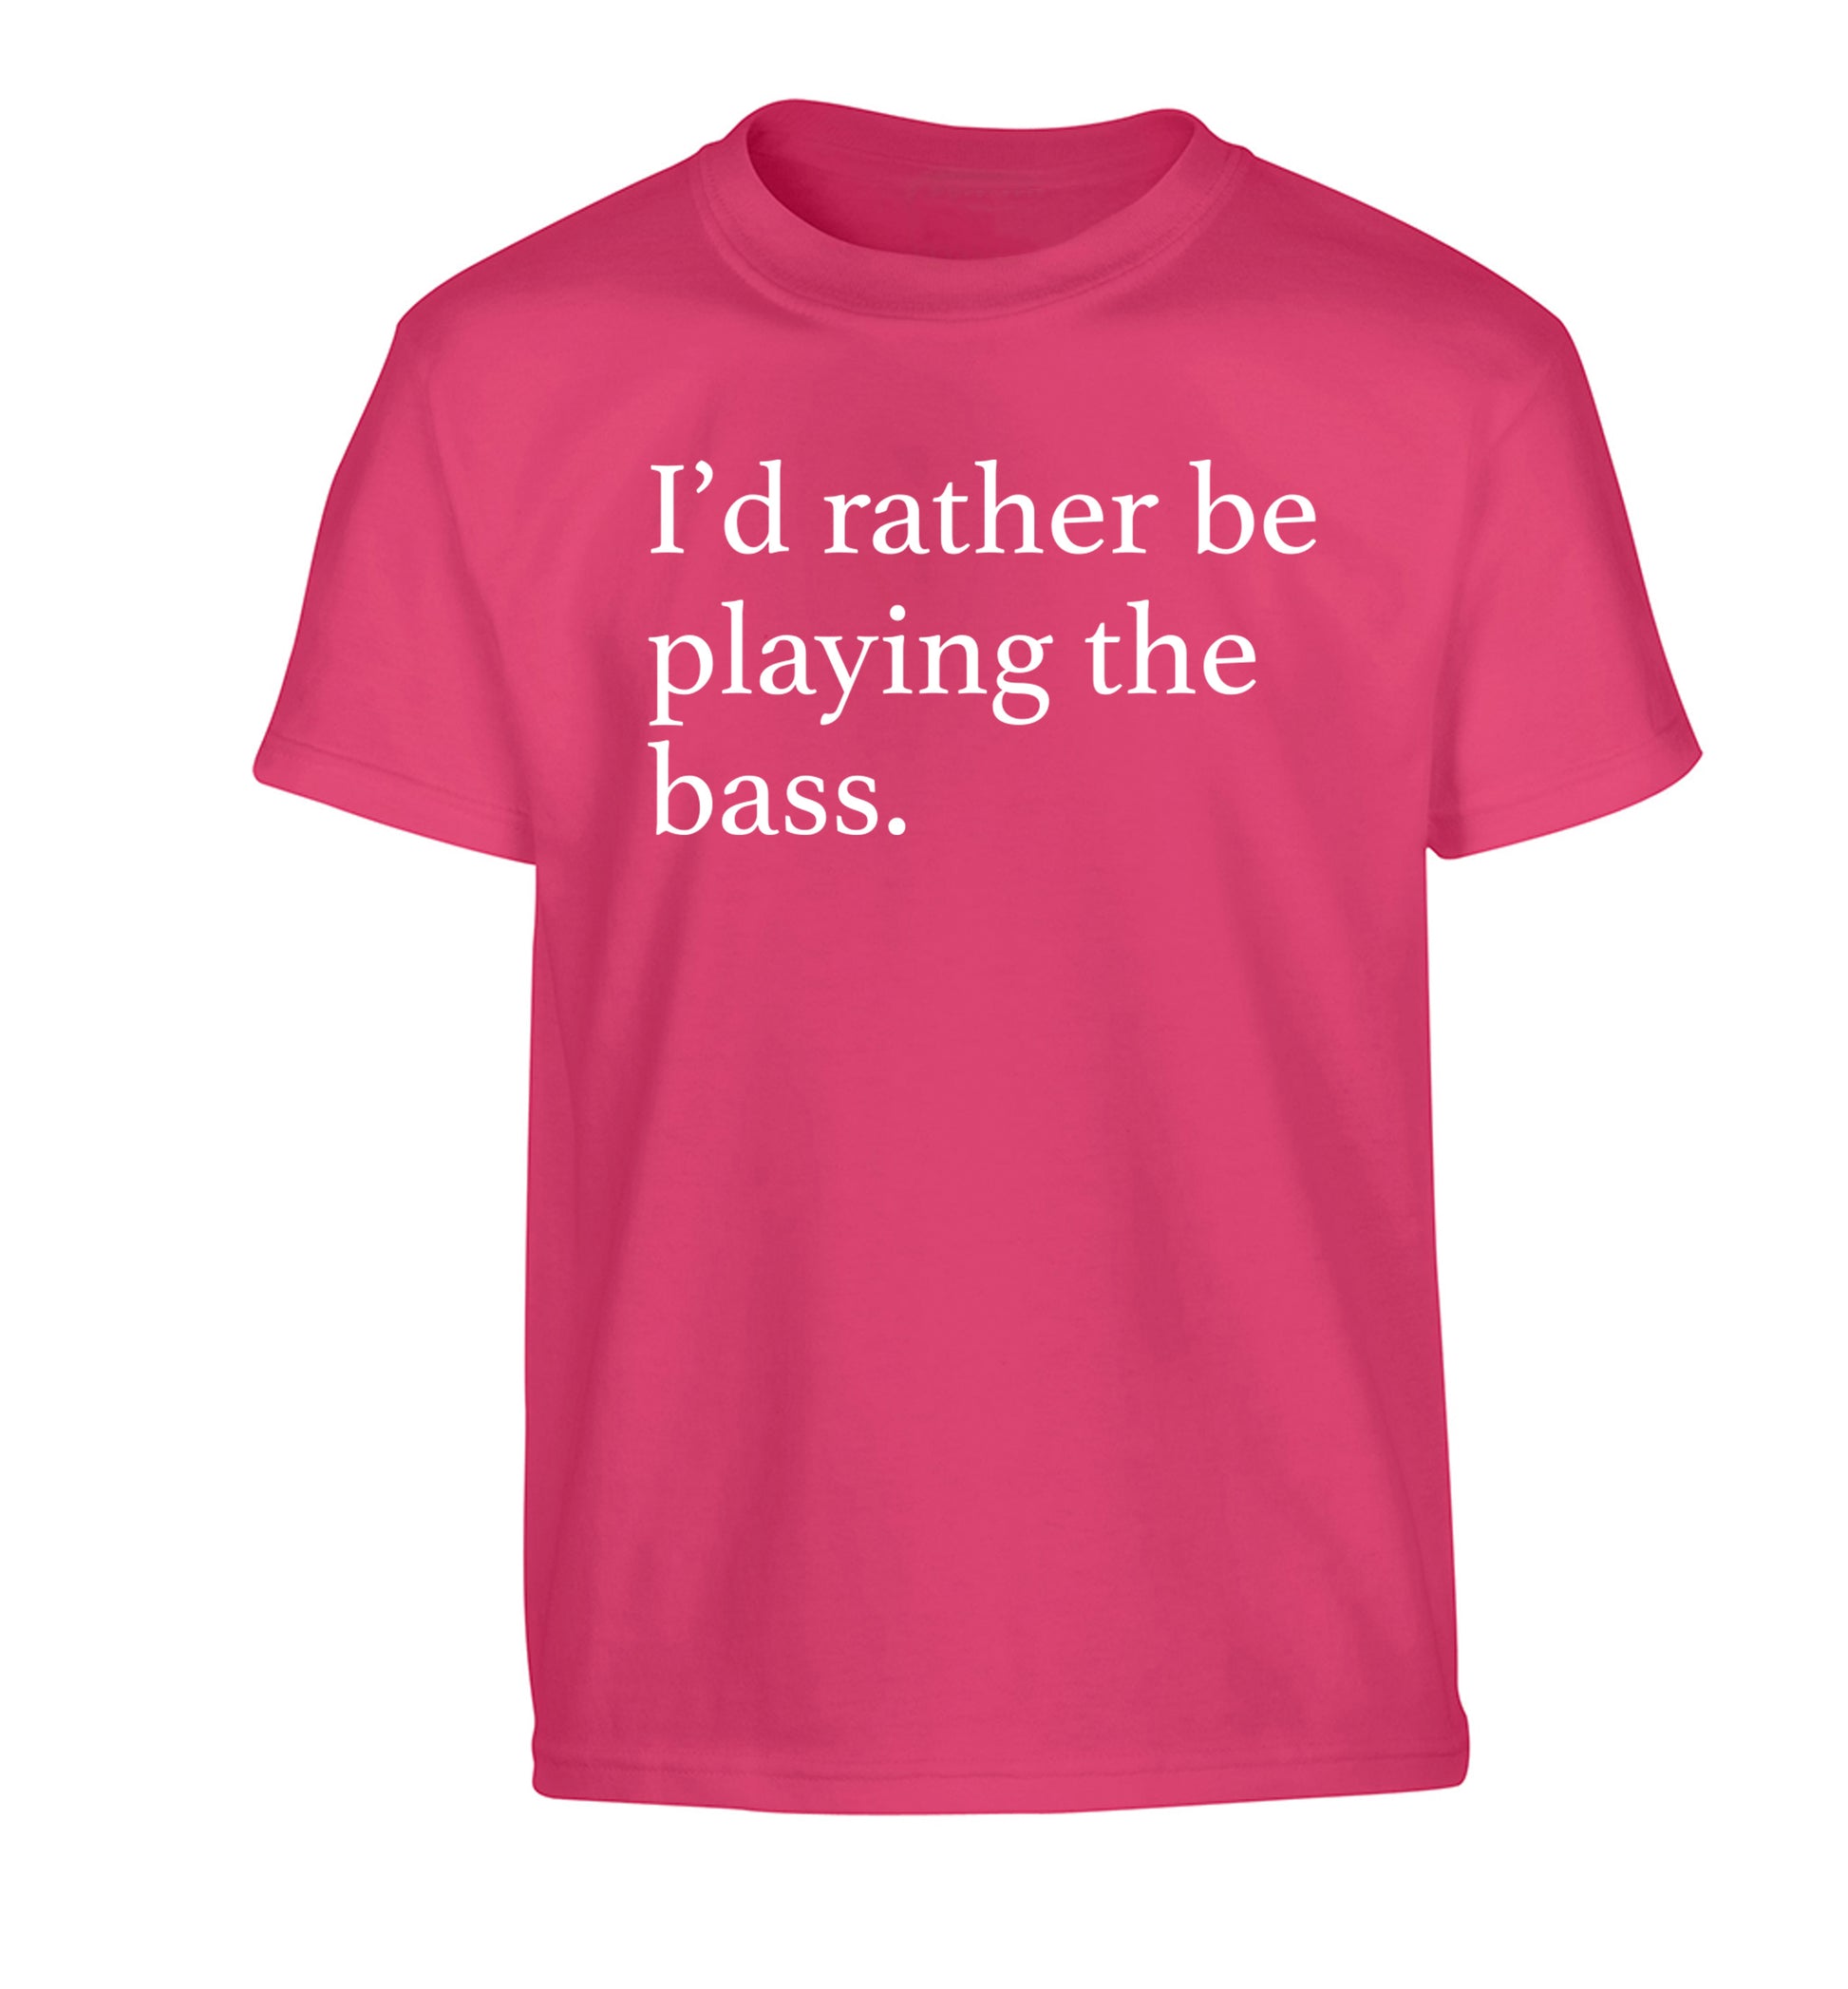 I'd rather by playing the bass Children's pink Tshirt 12-14 Years